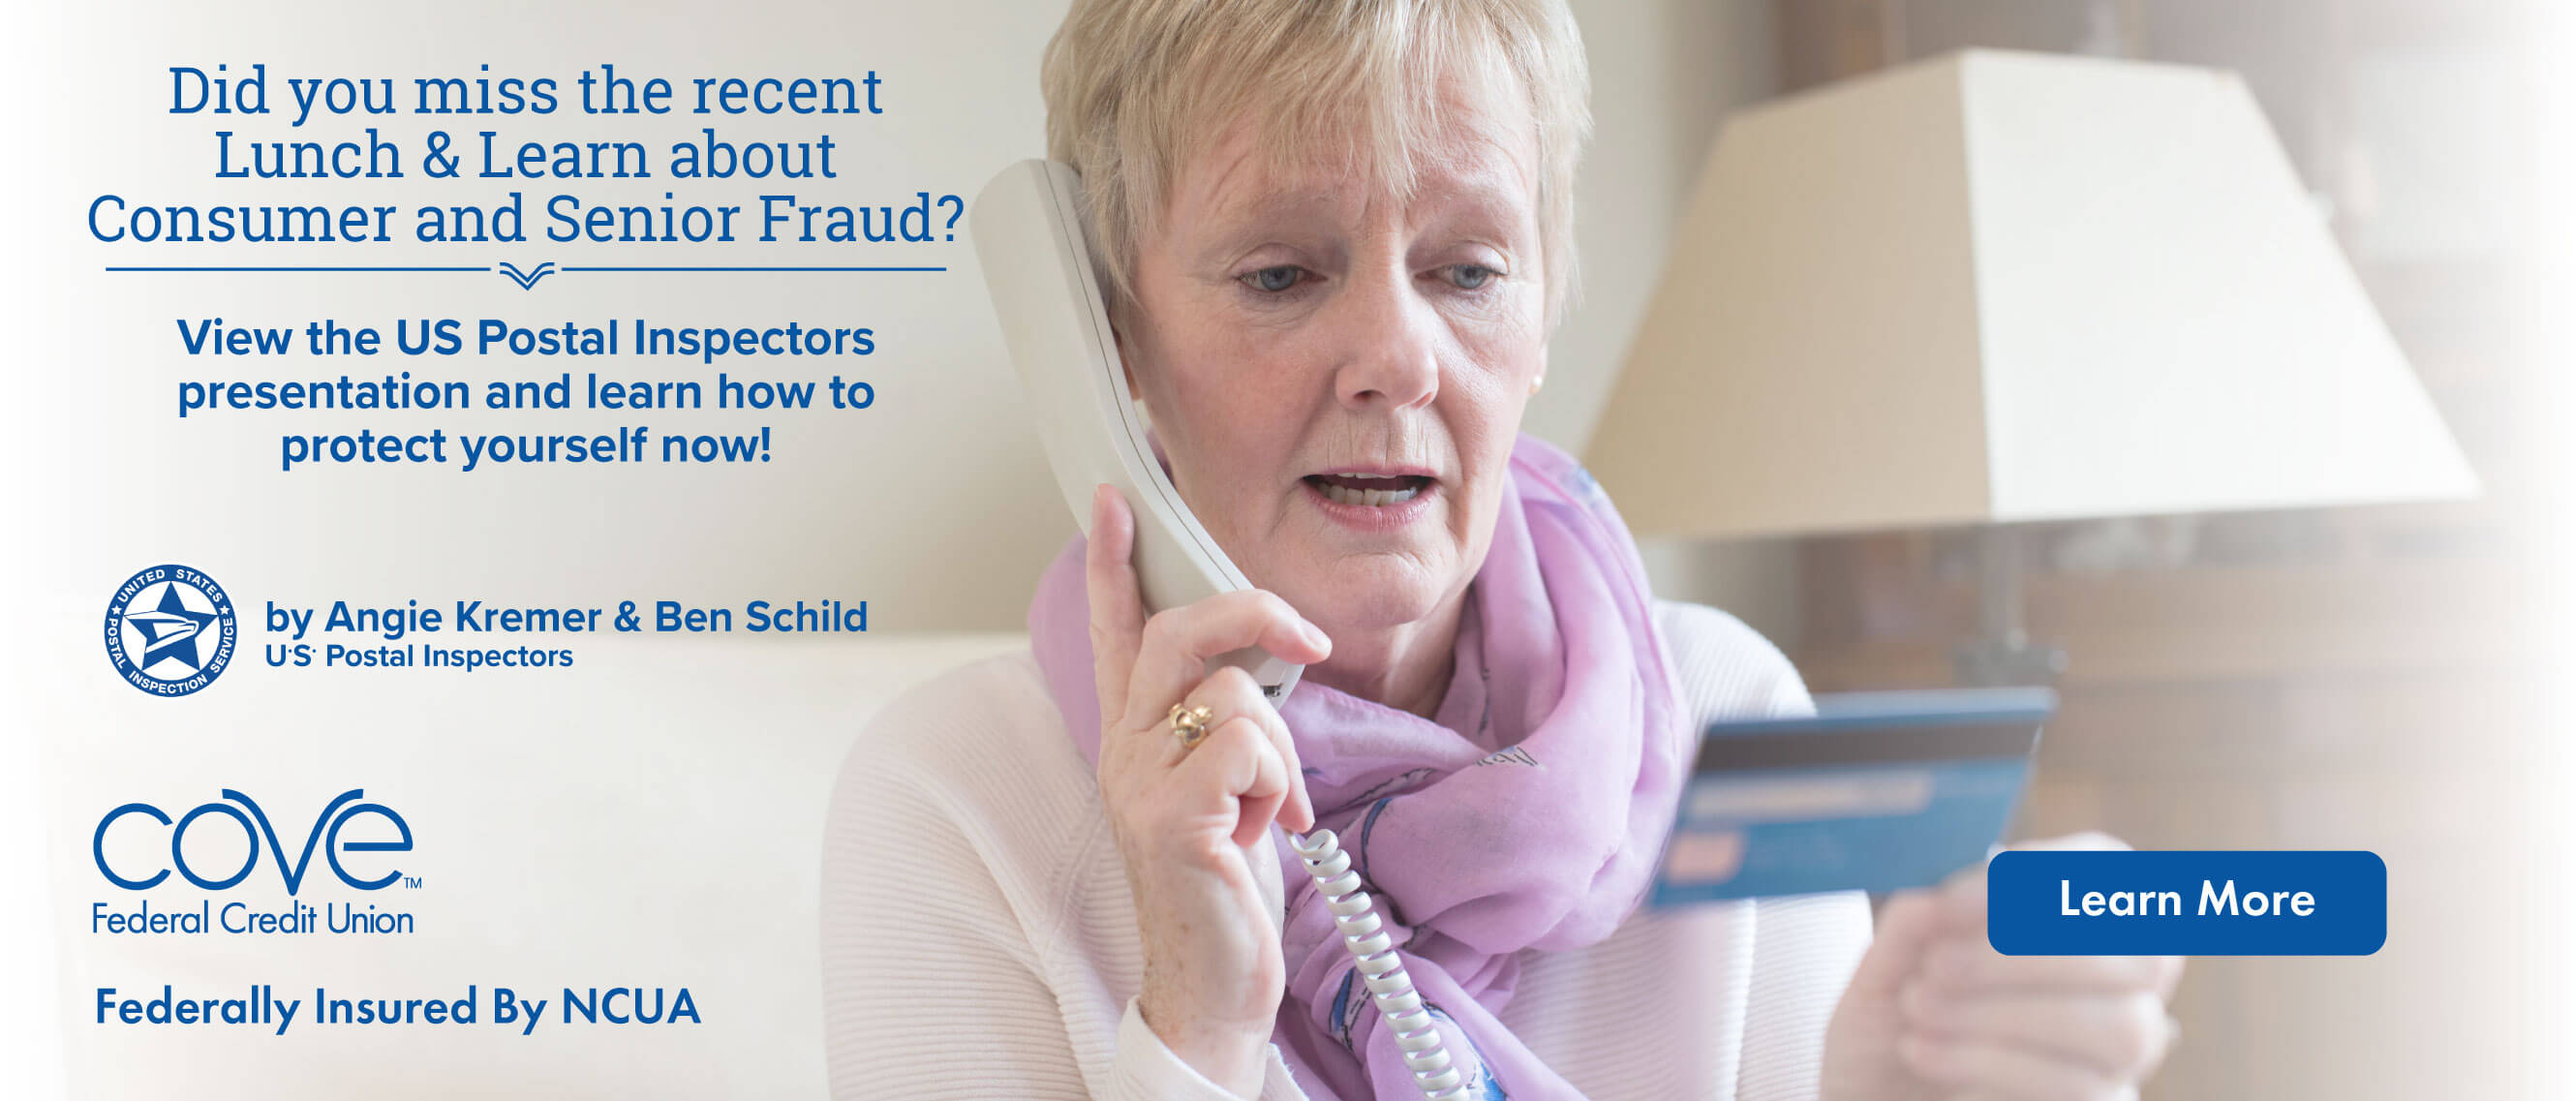 Learn About Consumer and Senior Fraud. View the US Postal Inspectors presentation and learn how to protect yourself now!